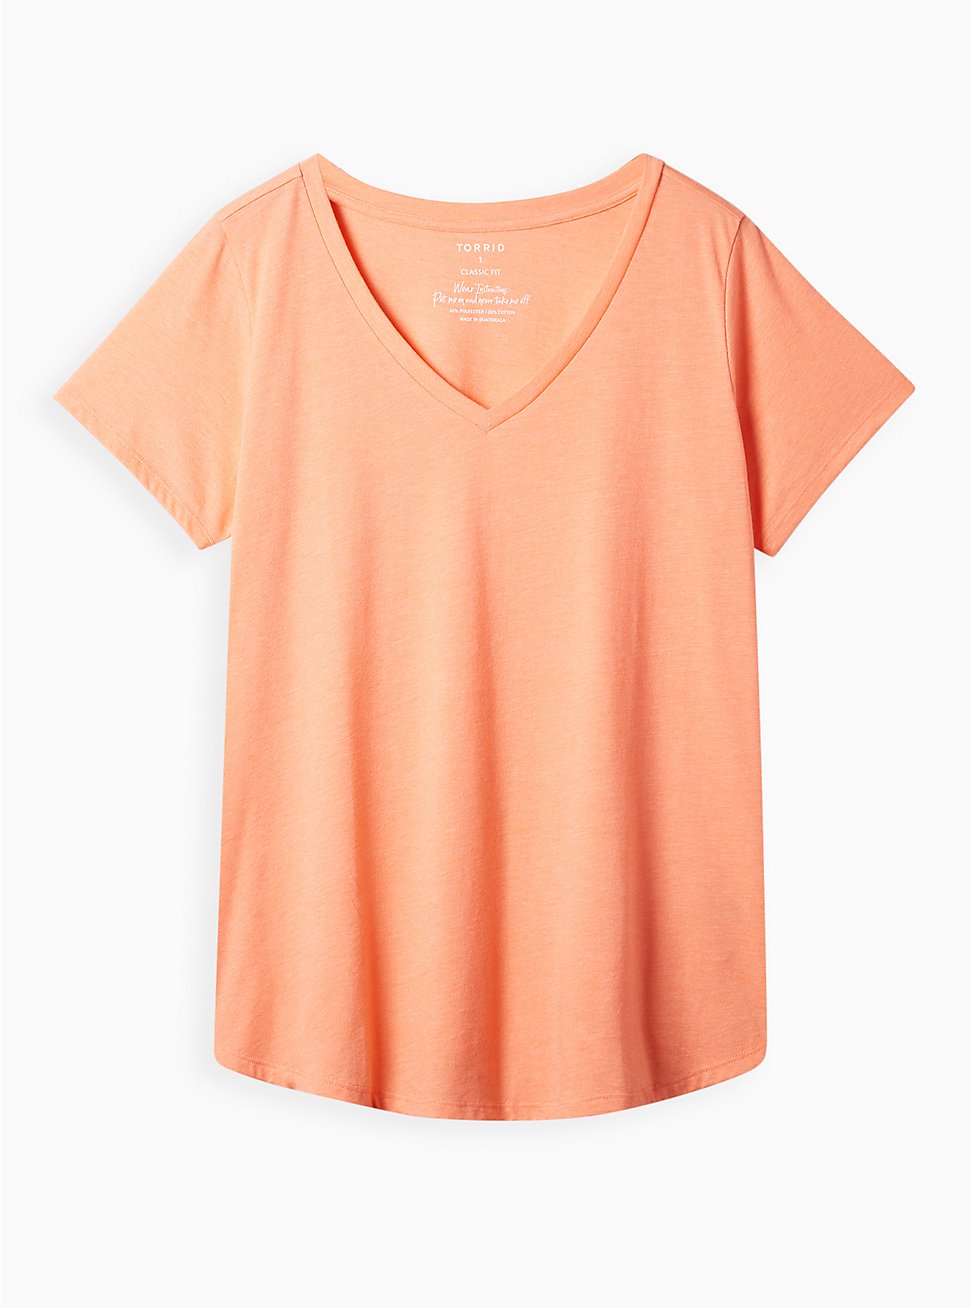 Plus Size Girlfriend Tee - Signature Jersey Heather Coral, CORAL, hi-res